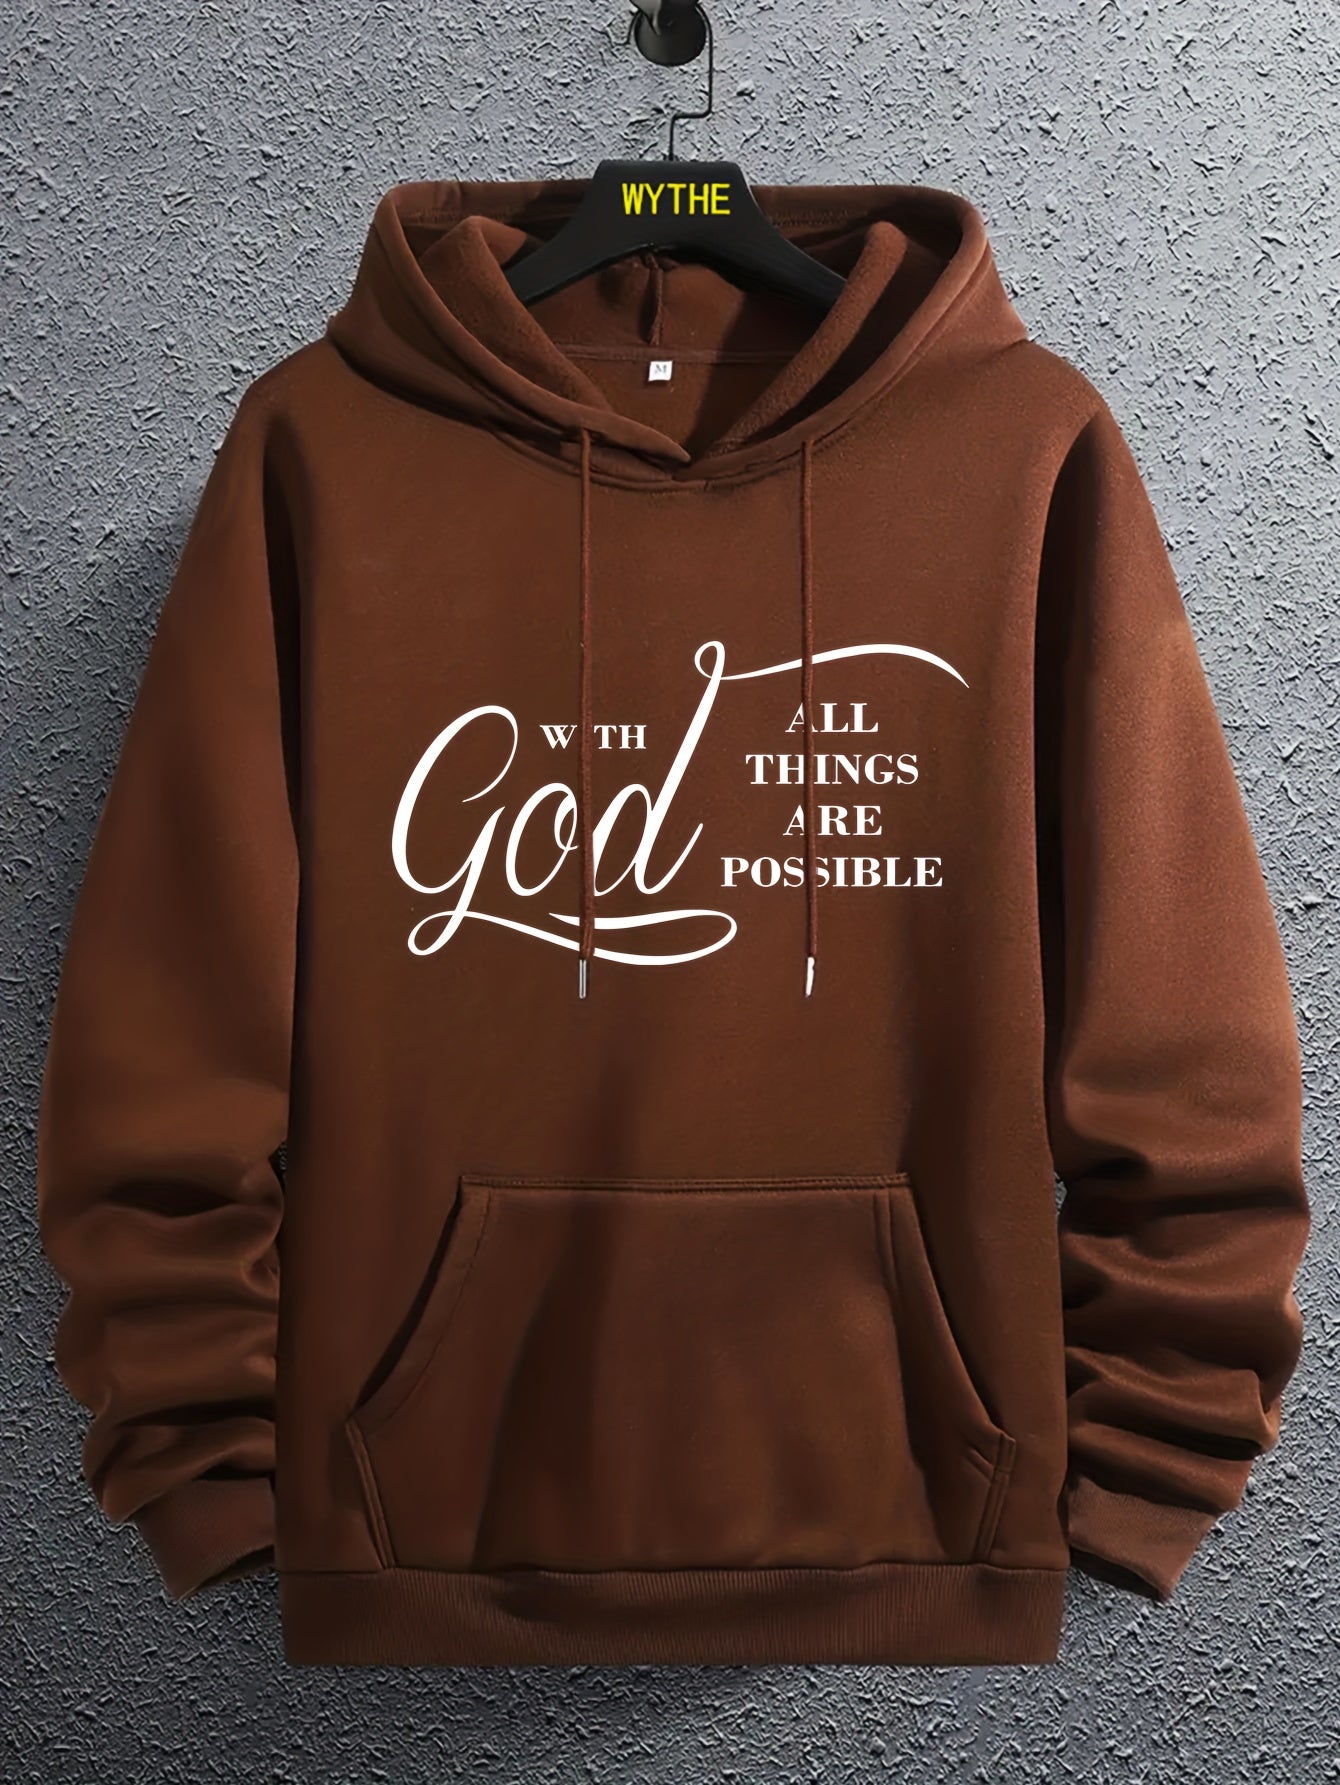 Christian Letter Print, Hoodies For Men, Graphic Sweatshirt With Kangaroo Pocket, Comfy Trendy Hooded Pullover, Mens Clothing For Fall Winter